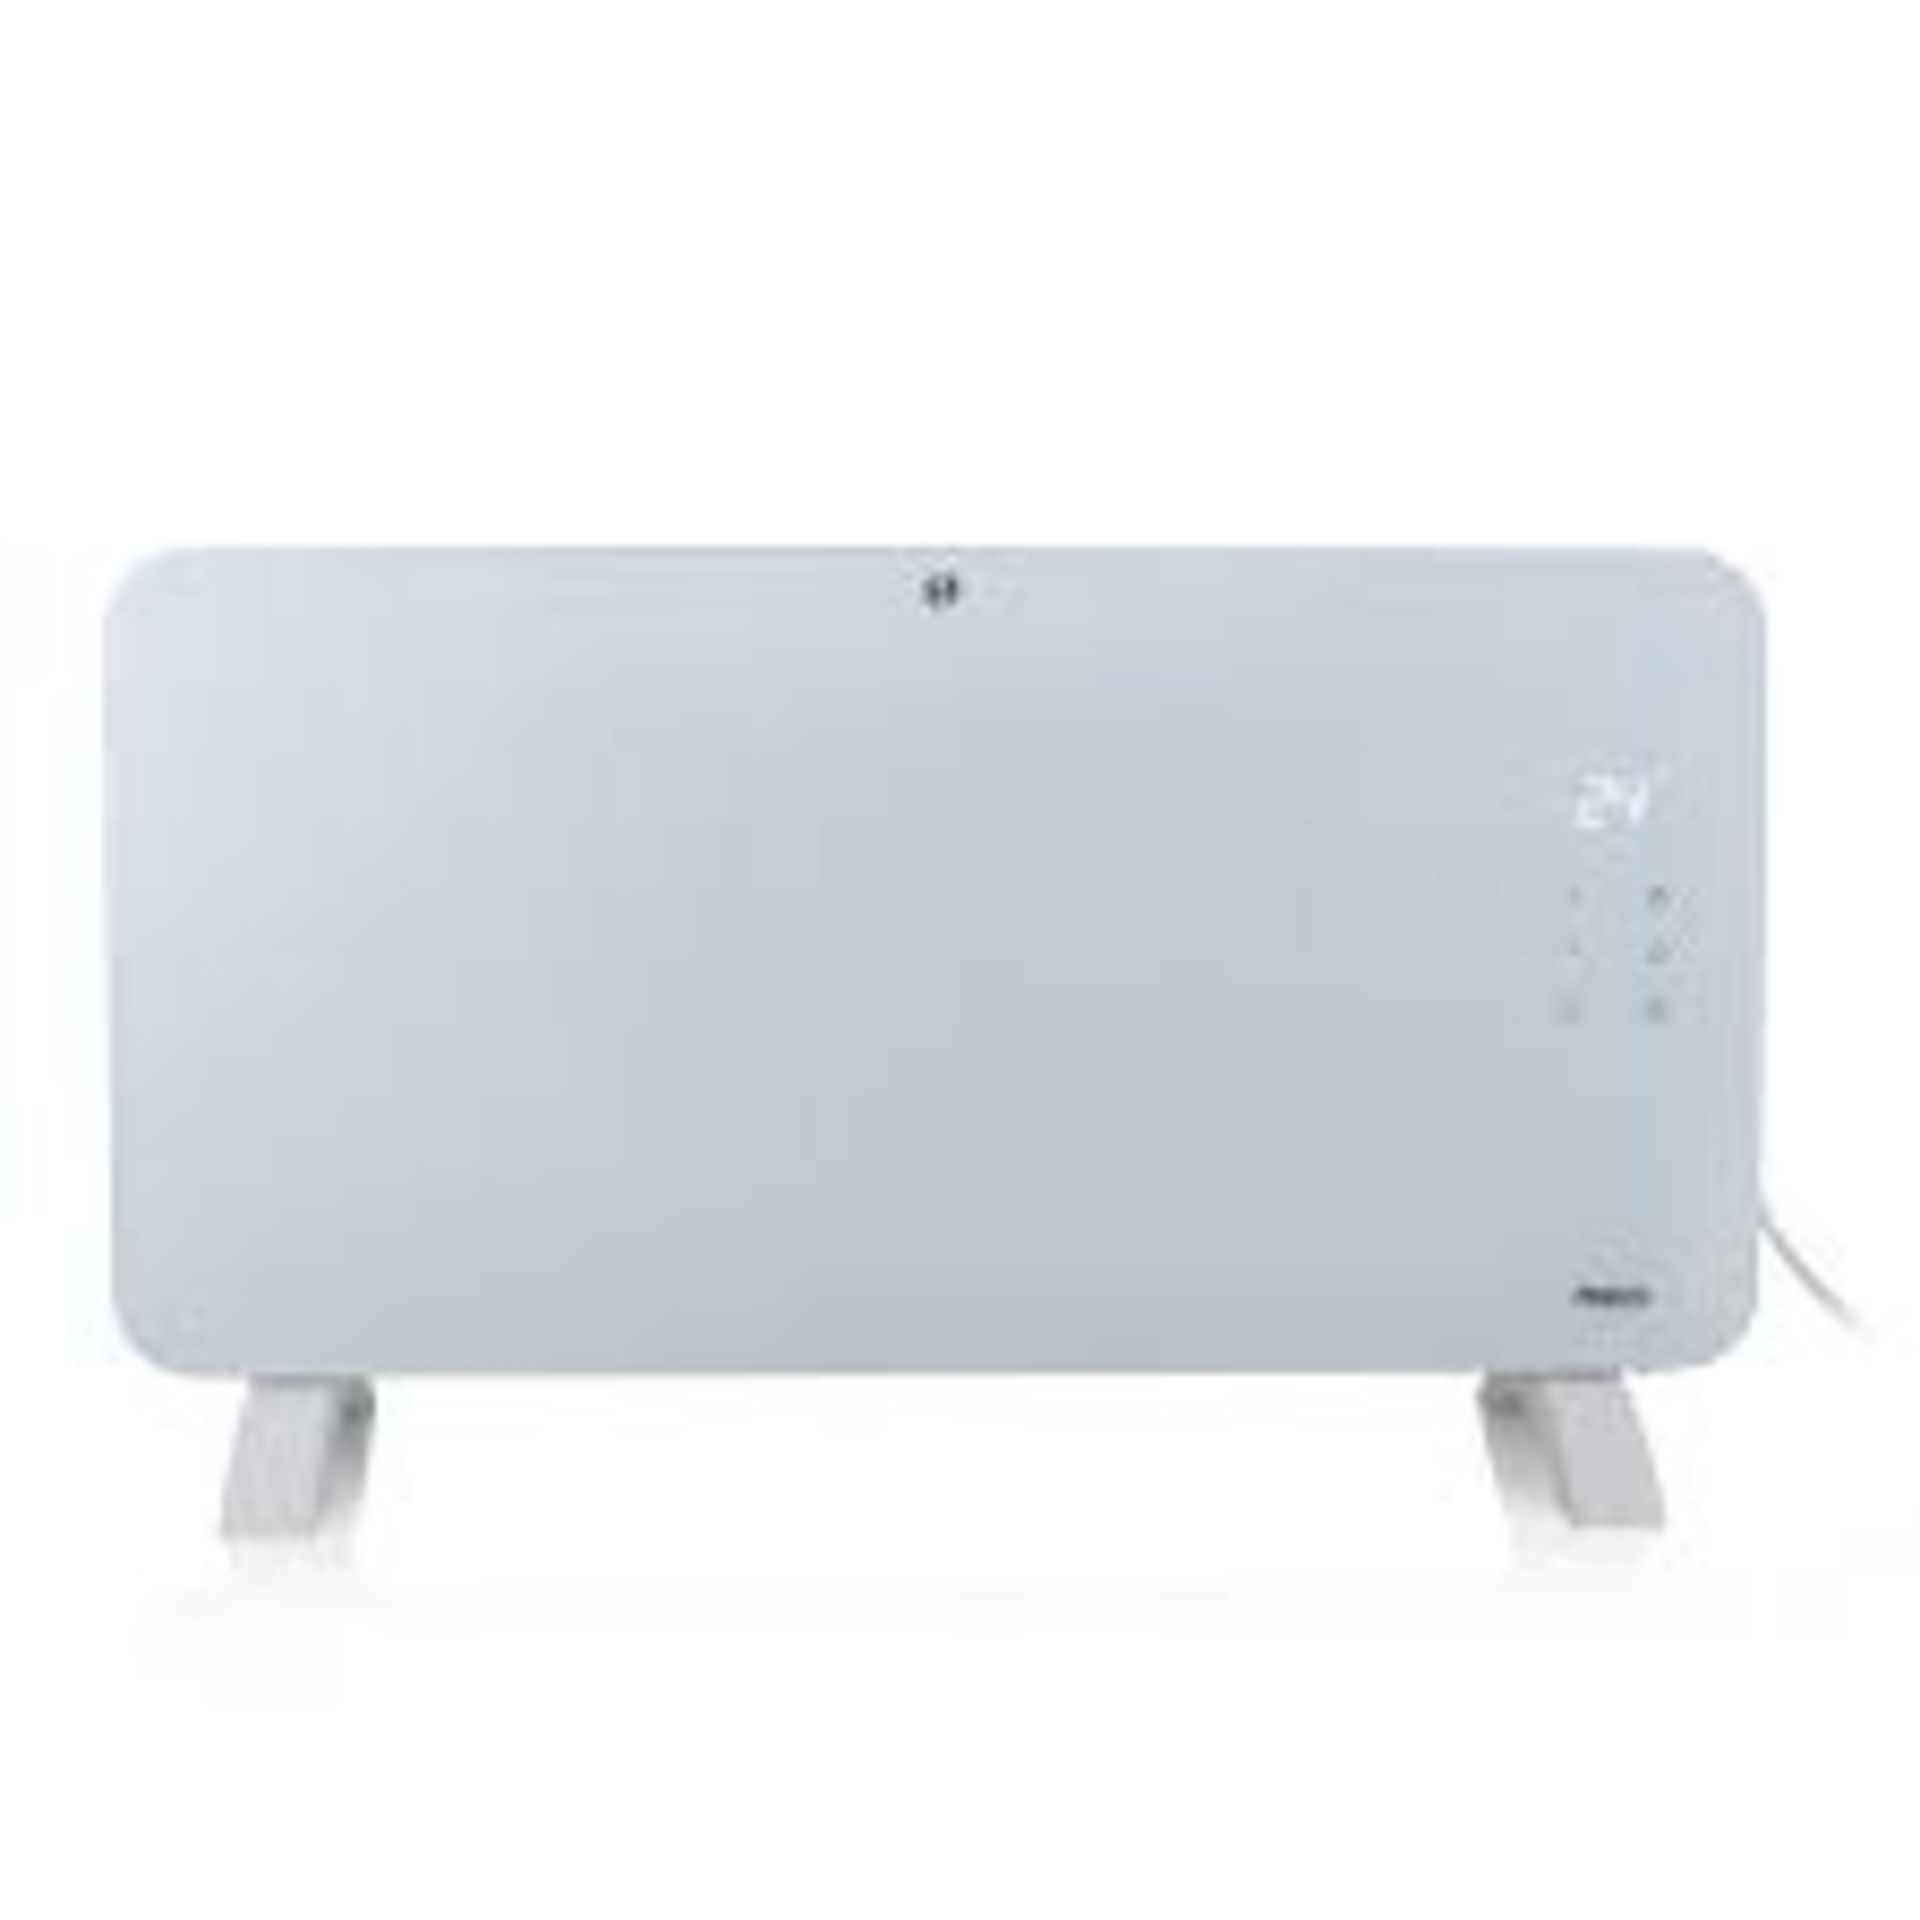 Princess 1500W White Smart Panel heater. - SR7. Suitable for any room in the house, loft,